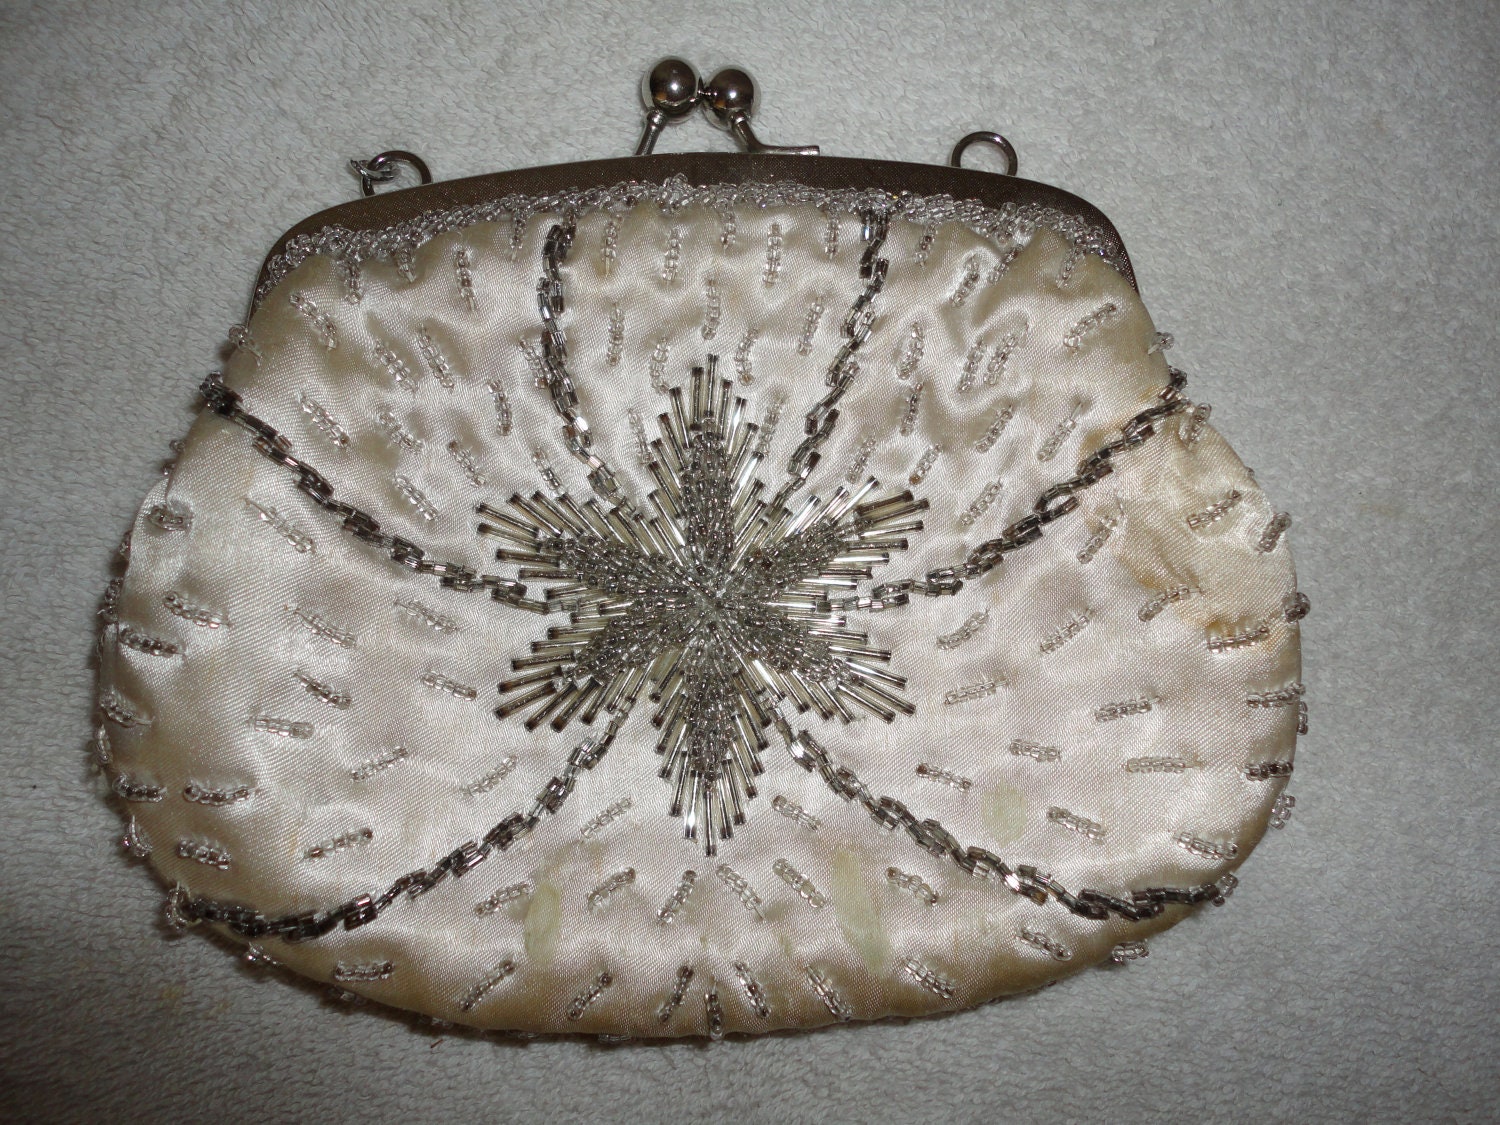 Vintage White Beaded Clutch Purse Hand Bag by TammysFindings